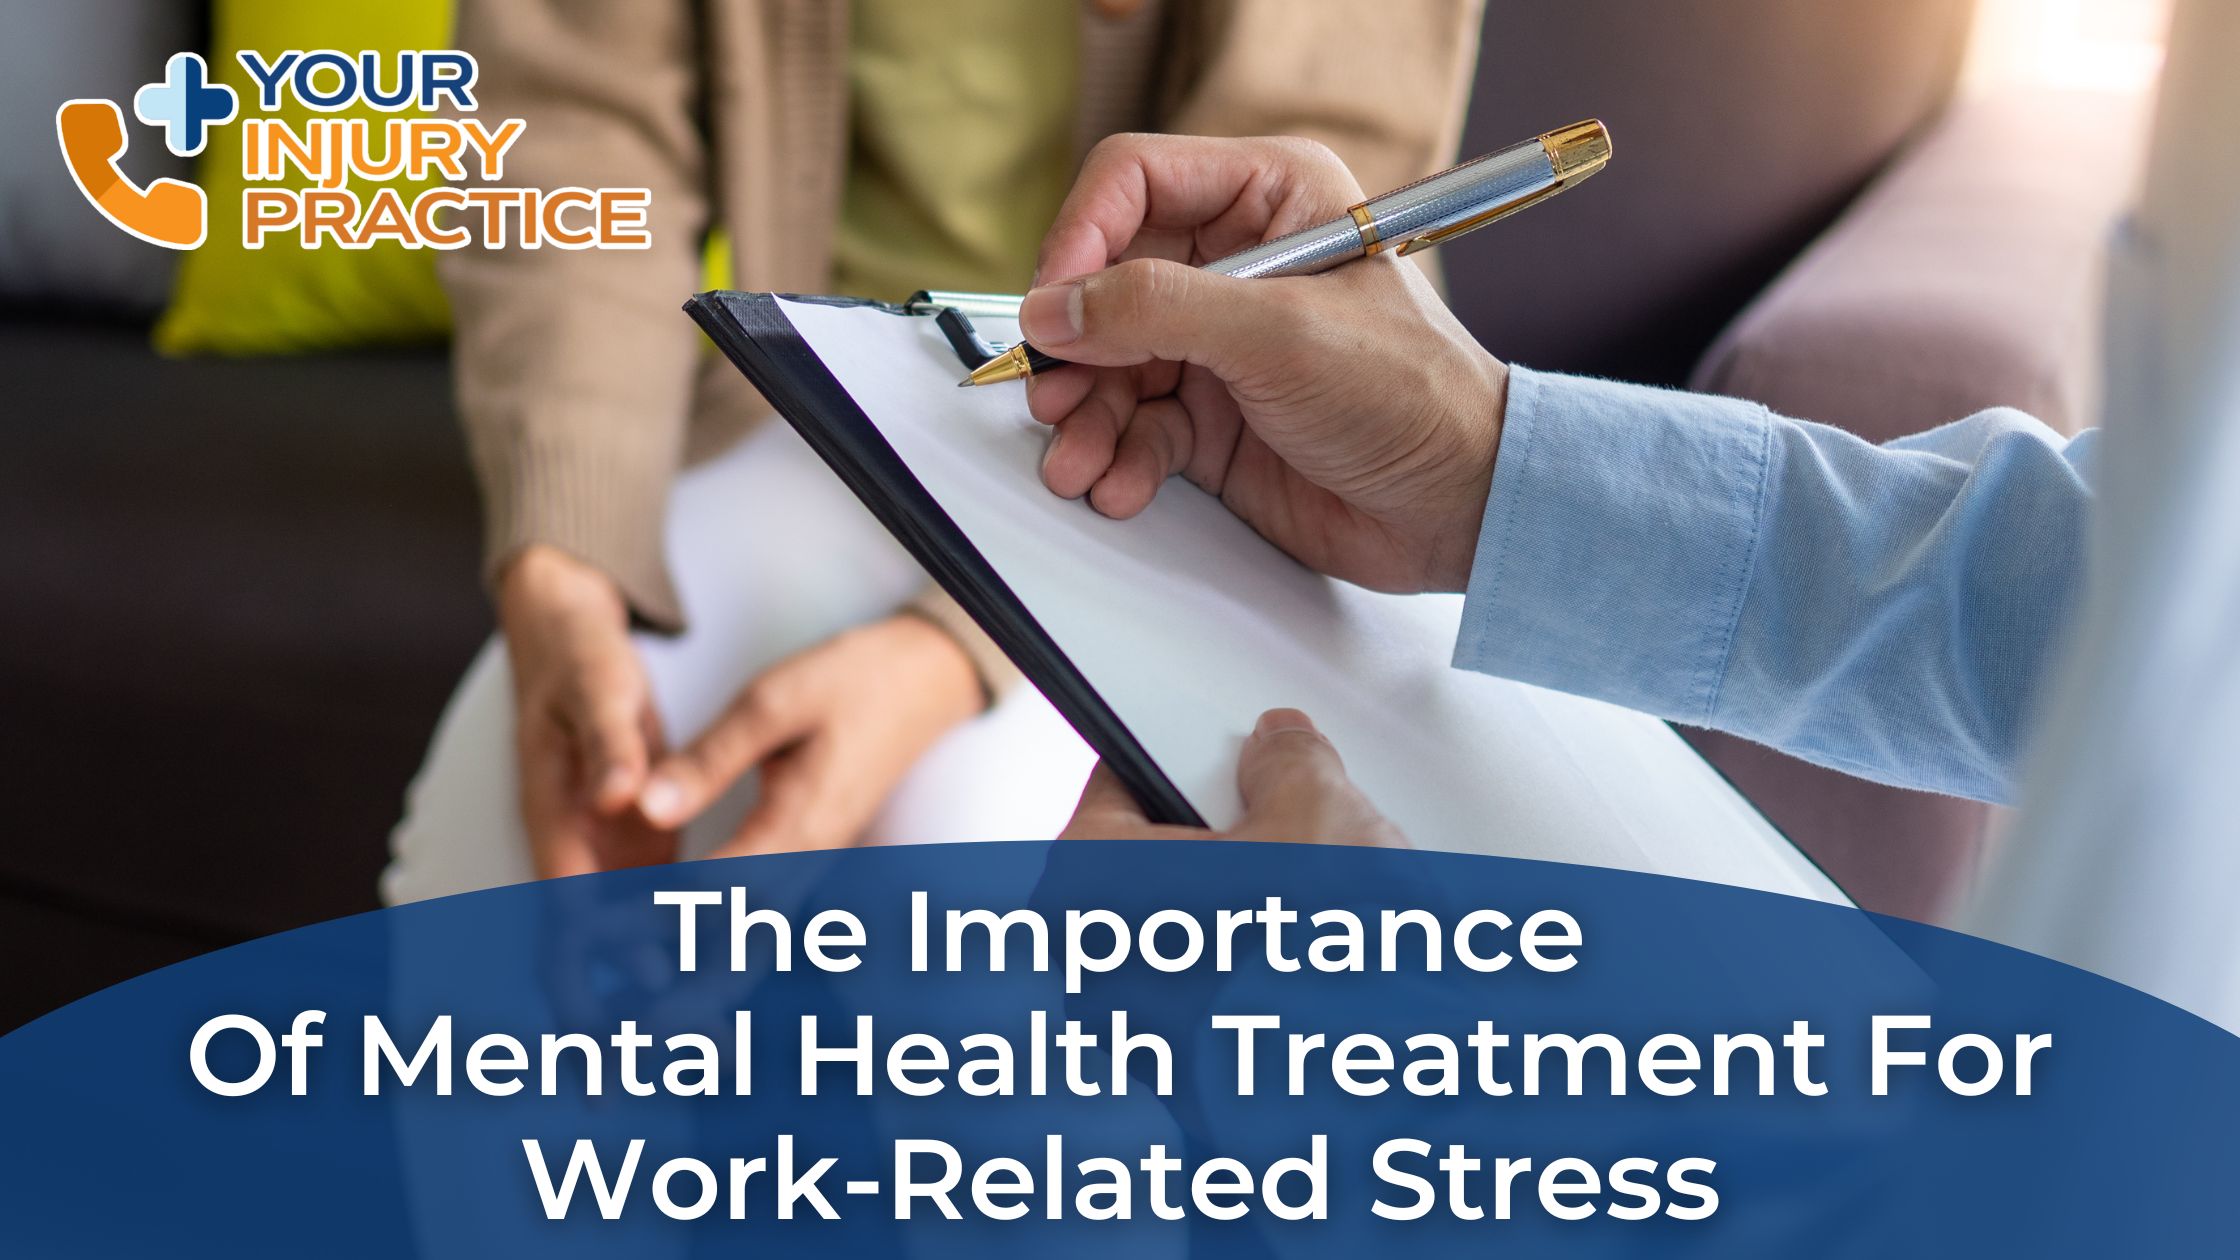 The Importance of Mental Health Treatment for Work-Related Stress